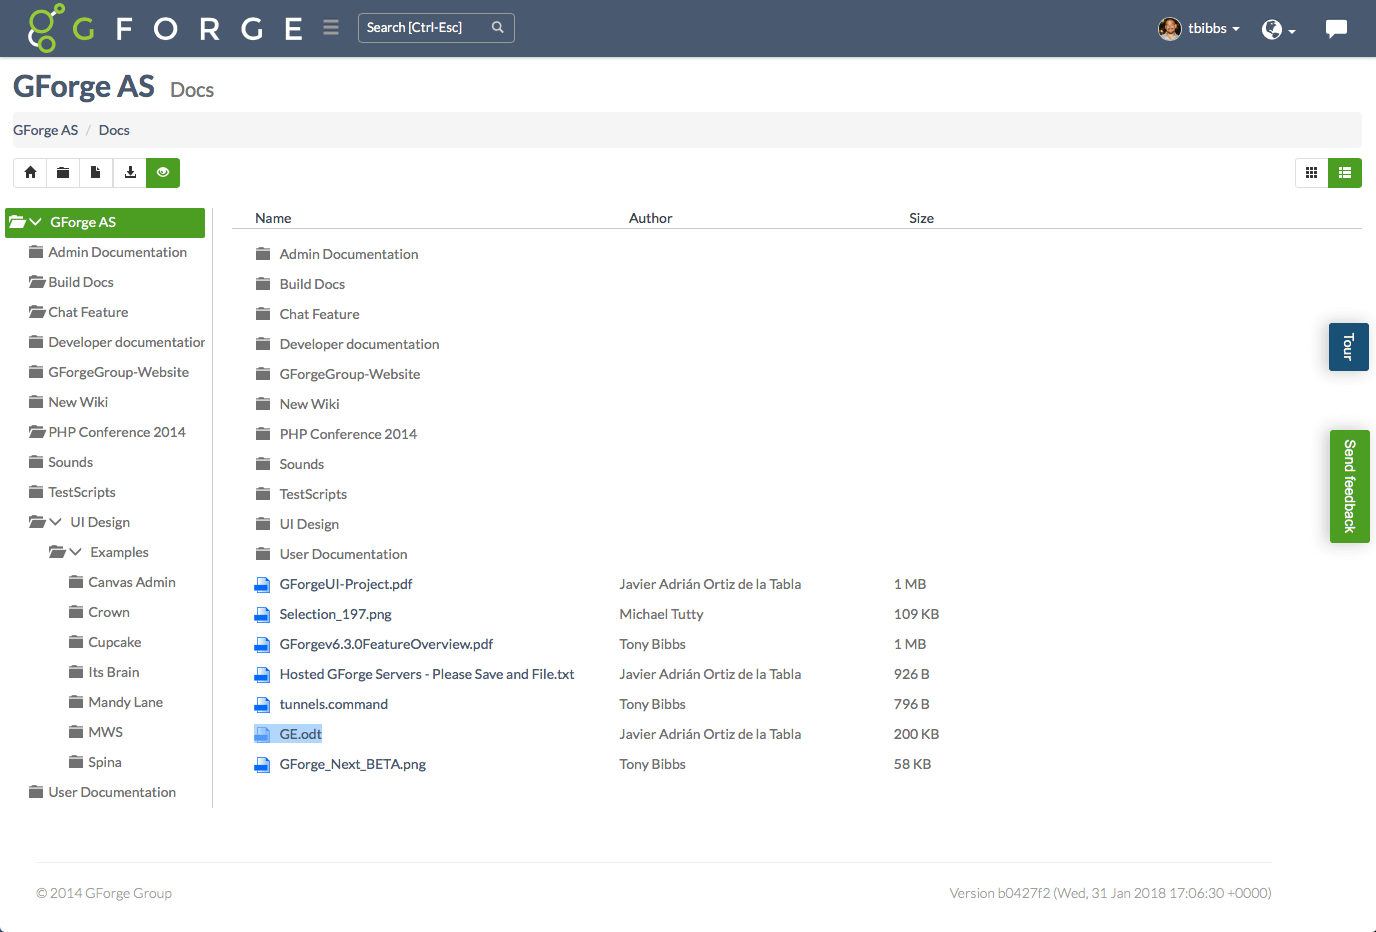 GForge keeps all versions of project documents like project plans, meeting minutes, etc.